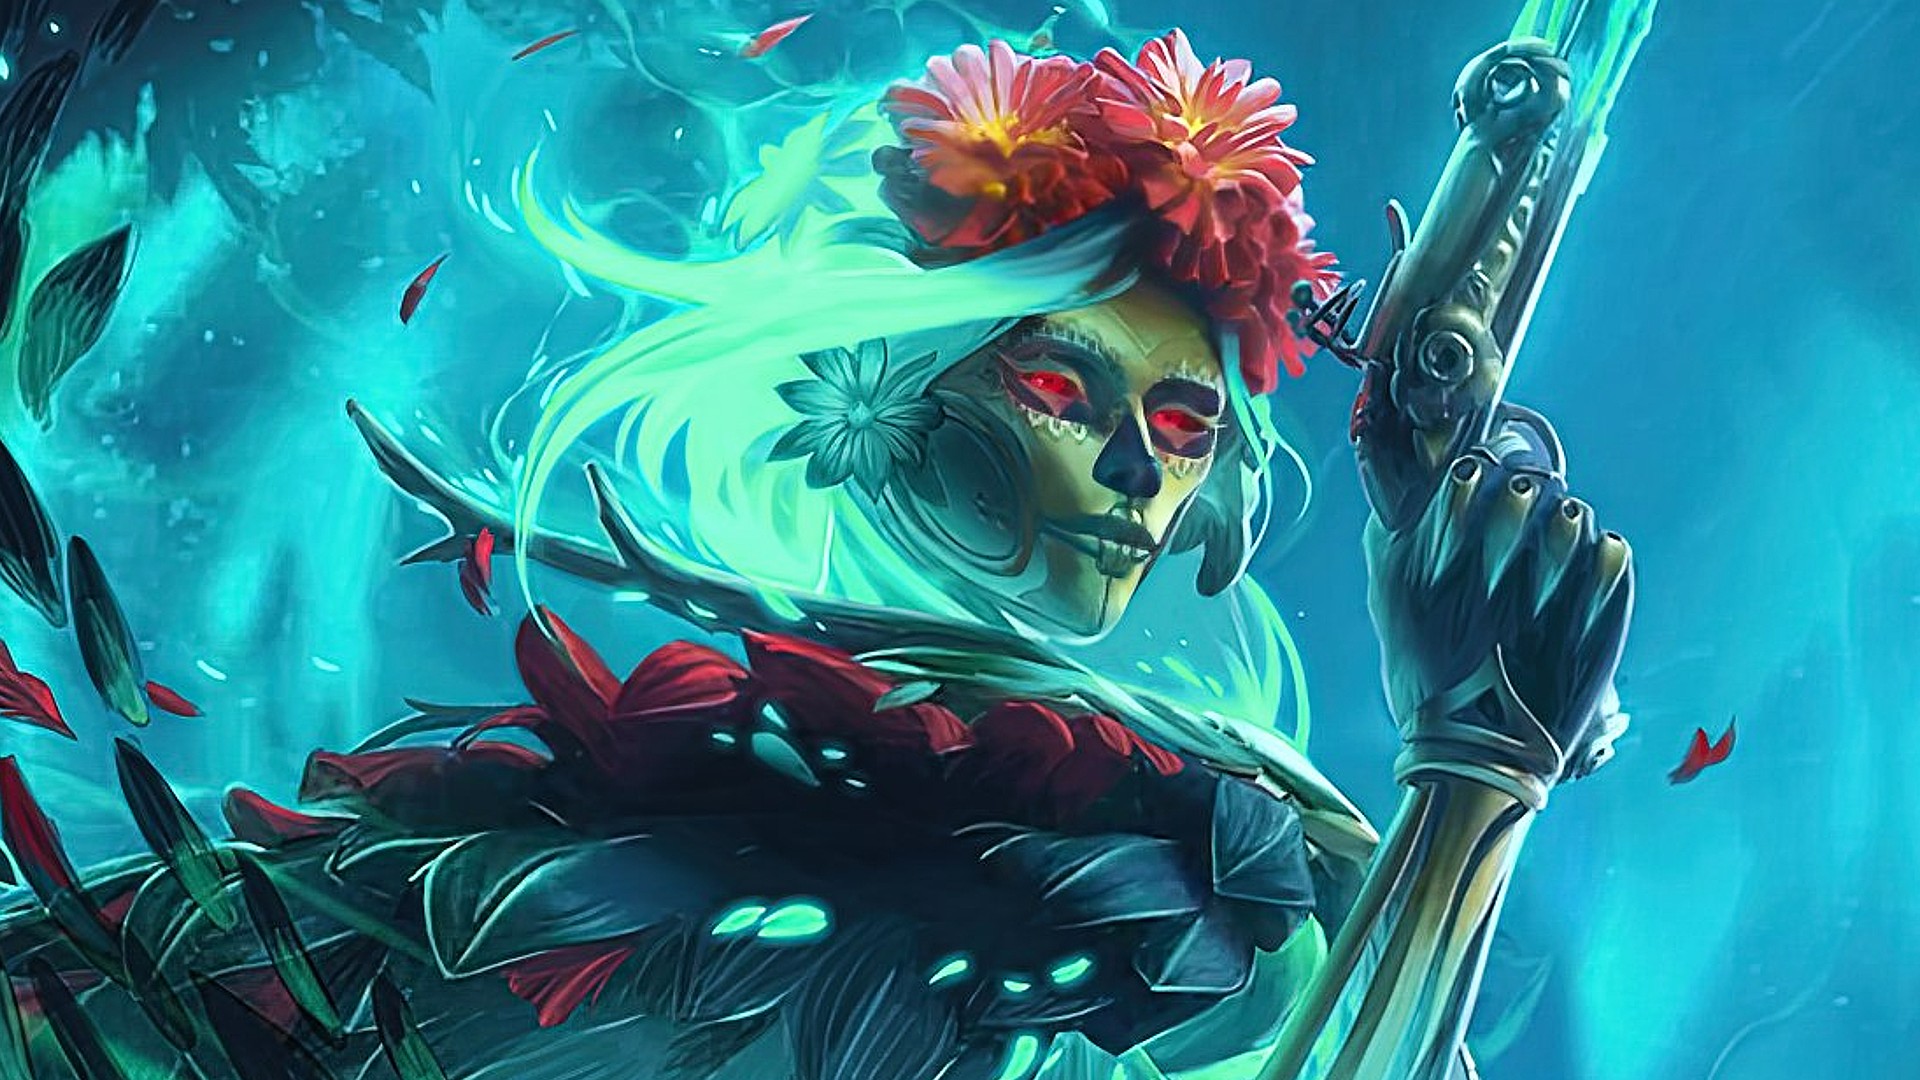 Dota 2 hero Muerta is wearing one of the MOBA's most powerful items